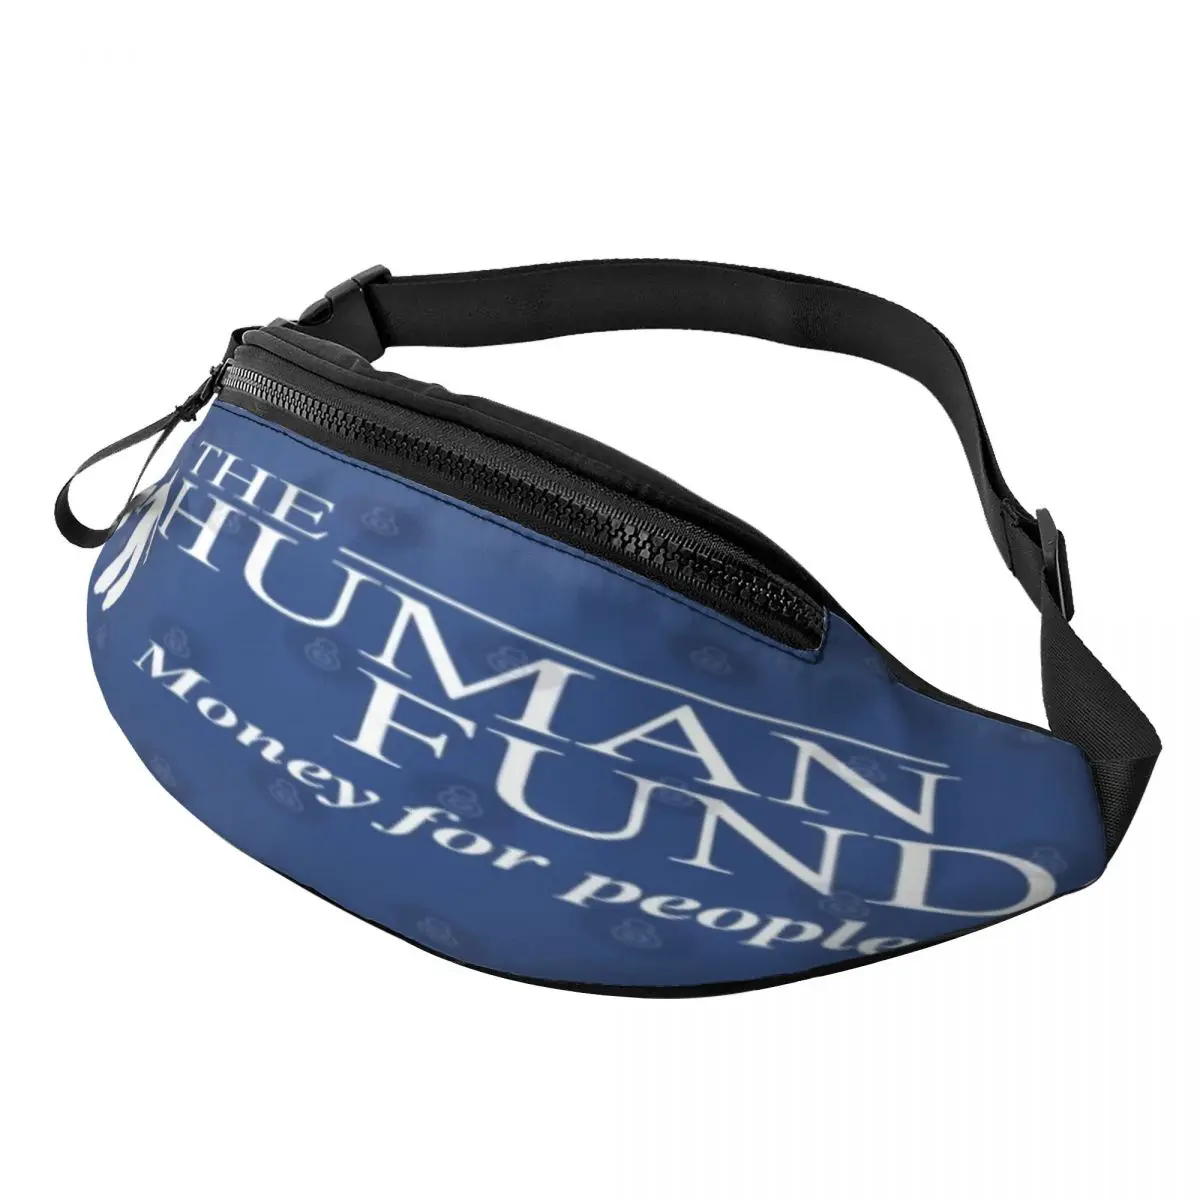 

The Human Fund - Money For People Fanny Pack,Waist Bag Fashionable Adjustable waistband Gift Nice gift Multi-Style